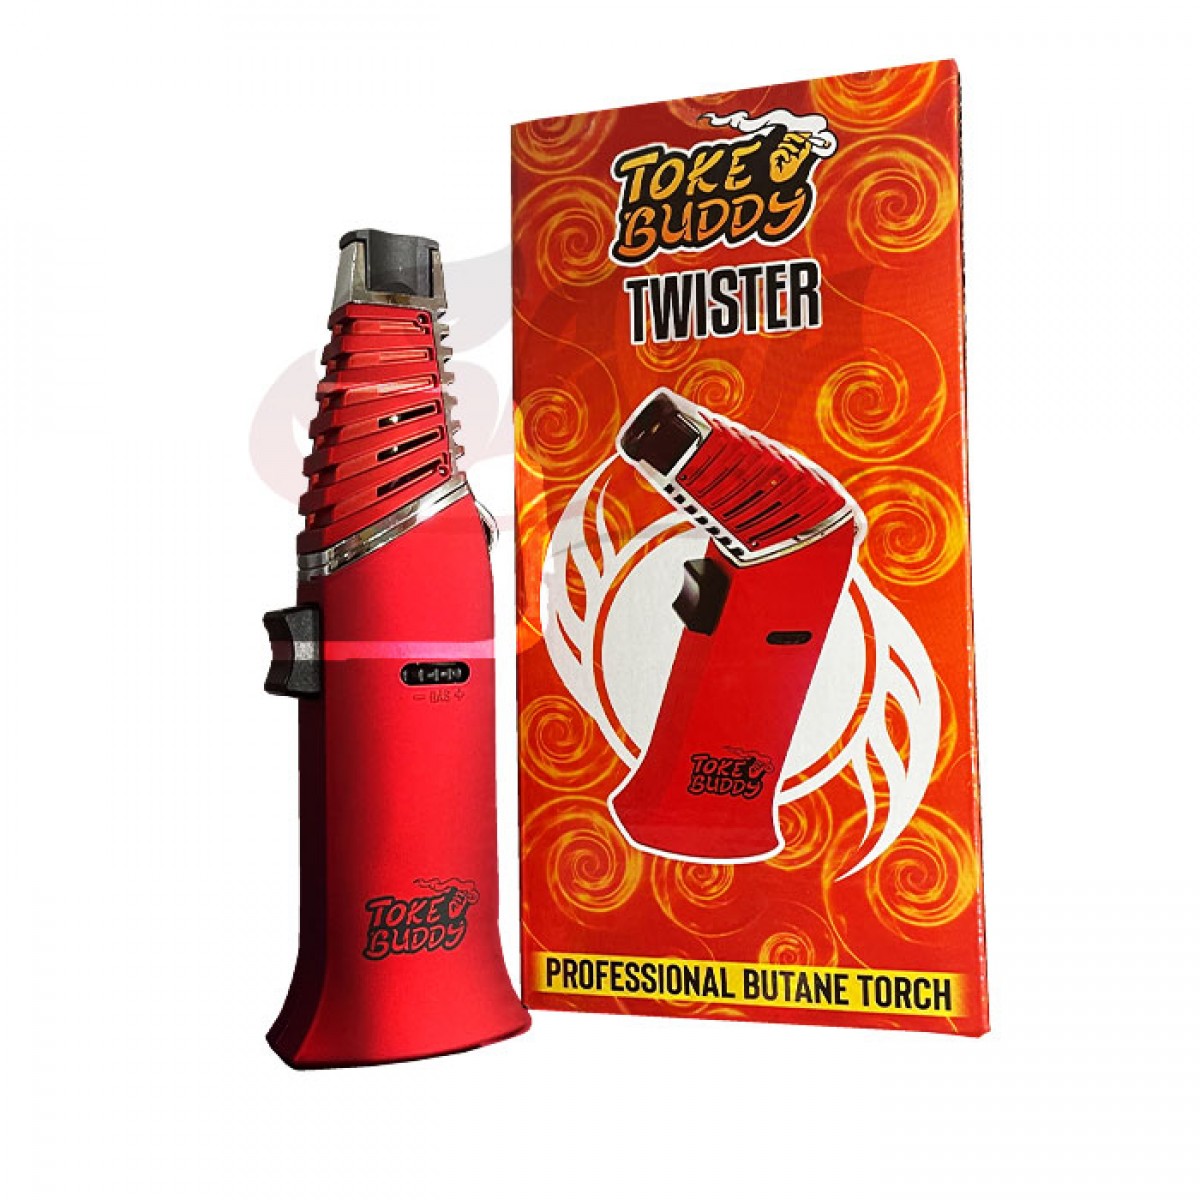 Toke Buddy Twister Torches